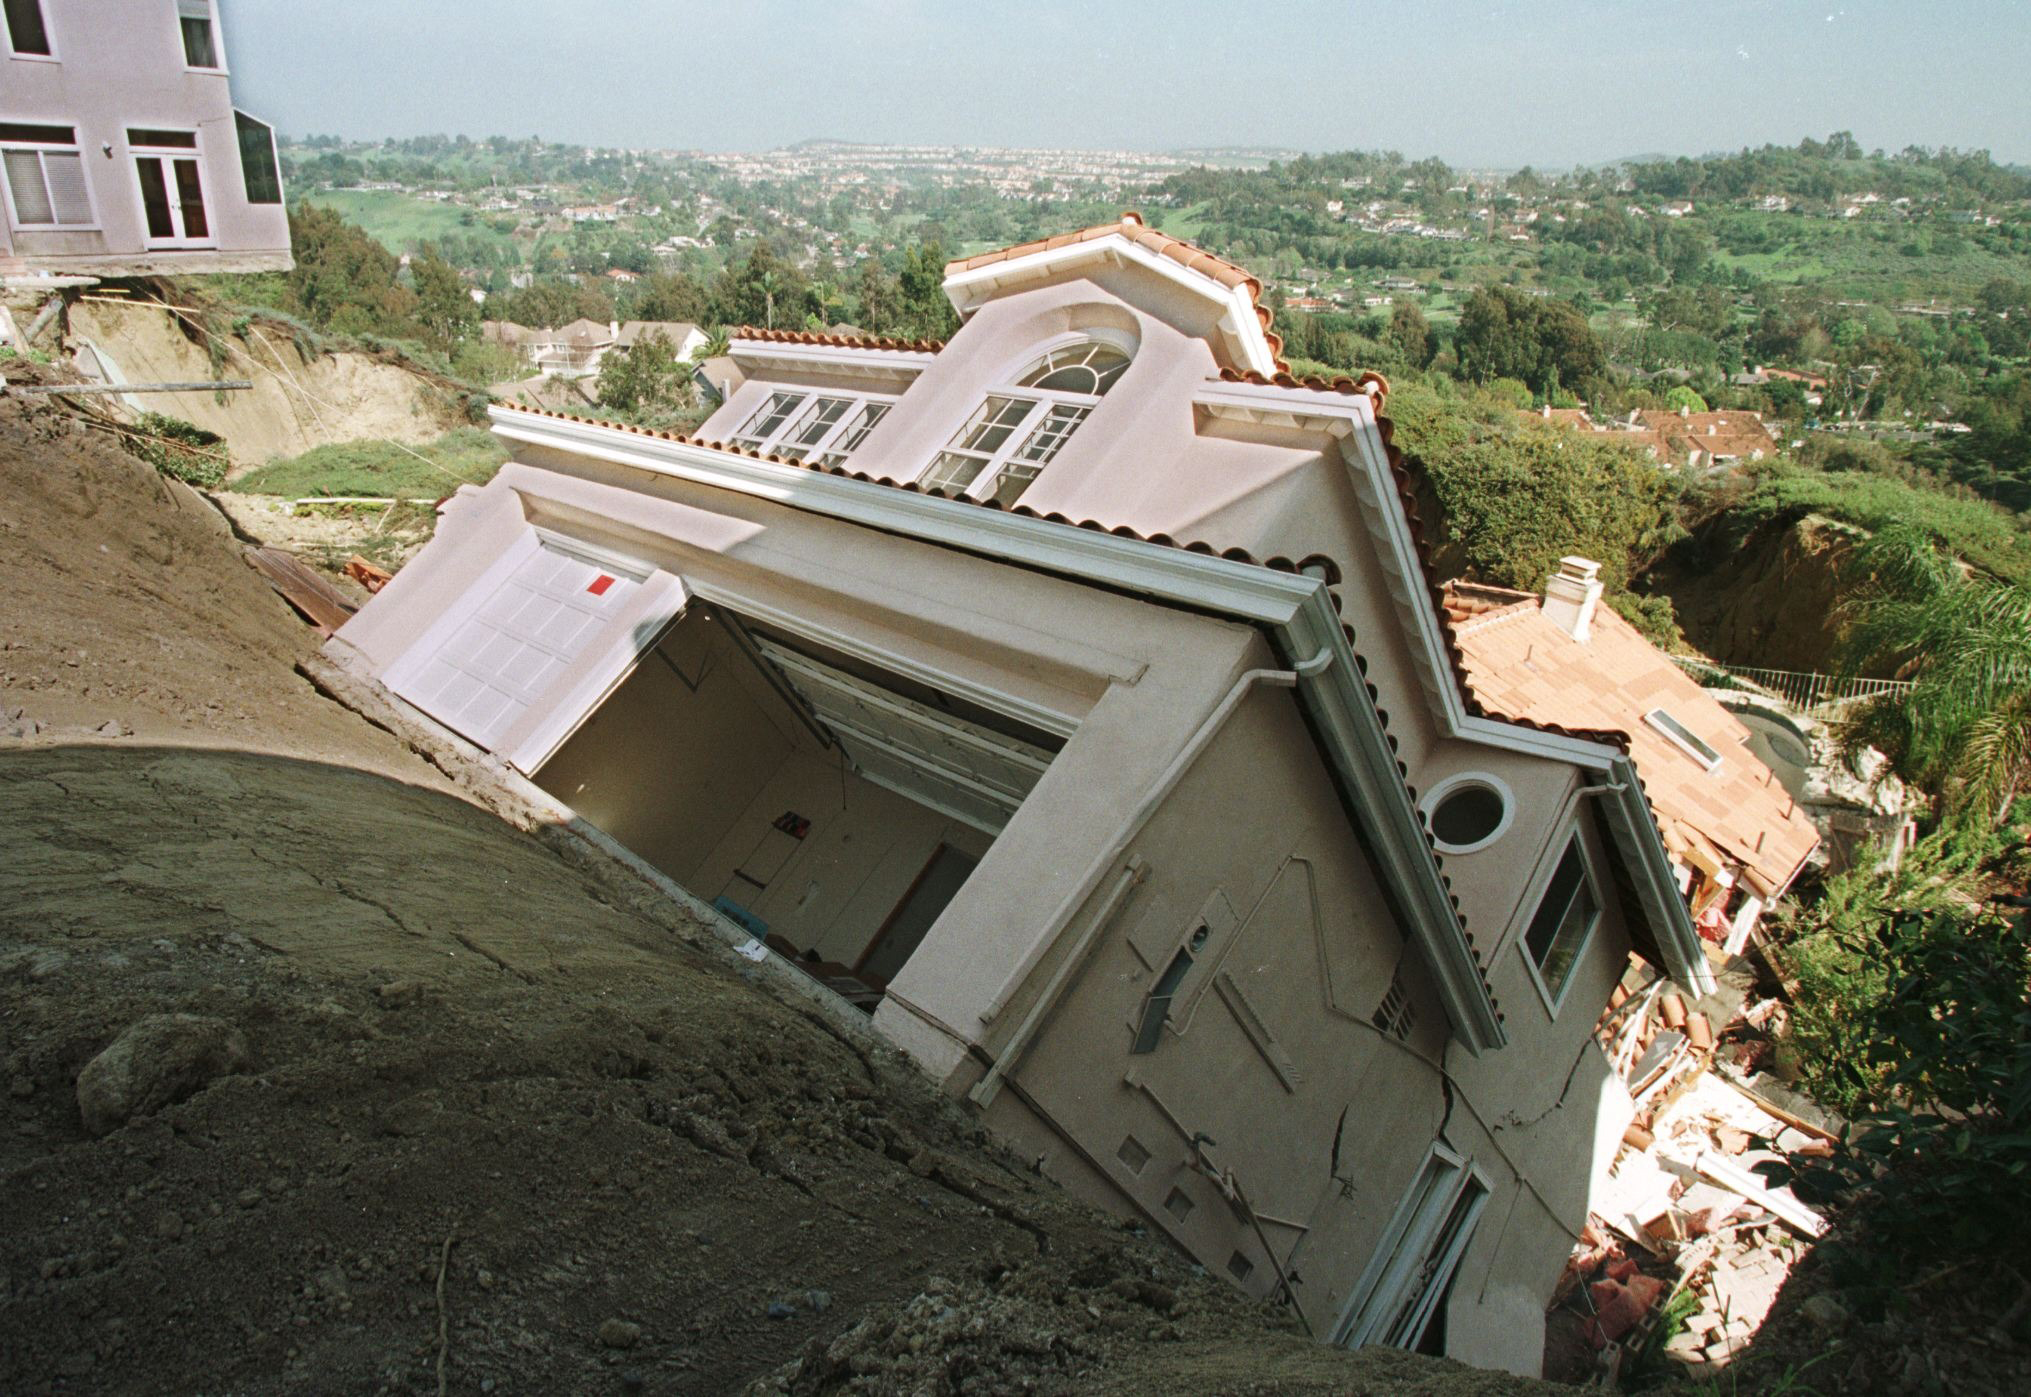 A California home slides down a hill after erosion due to rains tied to El Nino in March, 1998. (Vince Bucci—AFP/Getty Images)